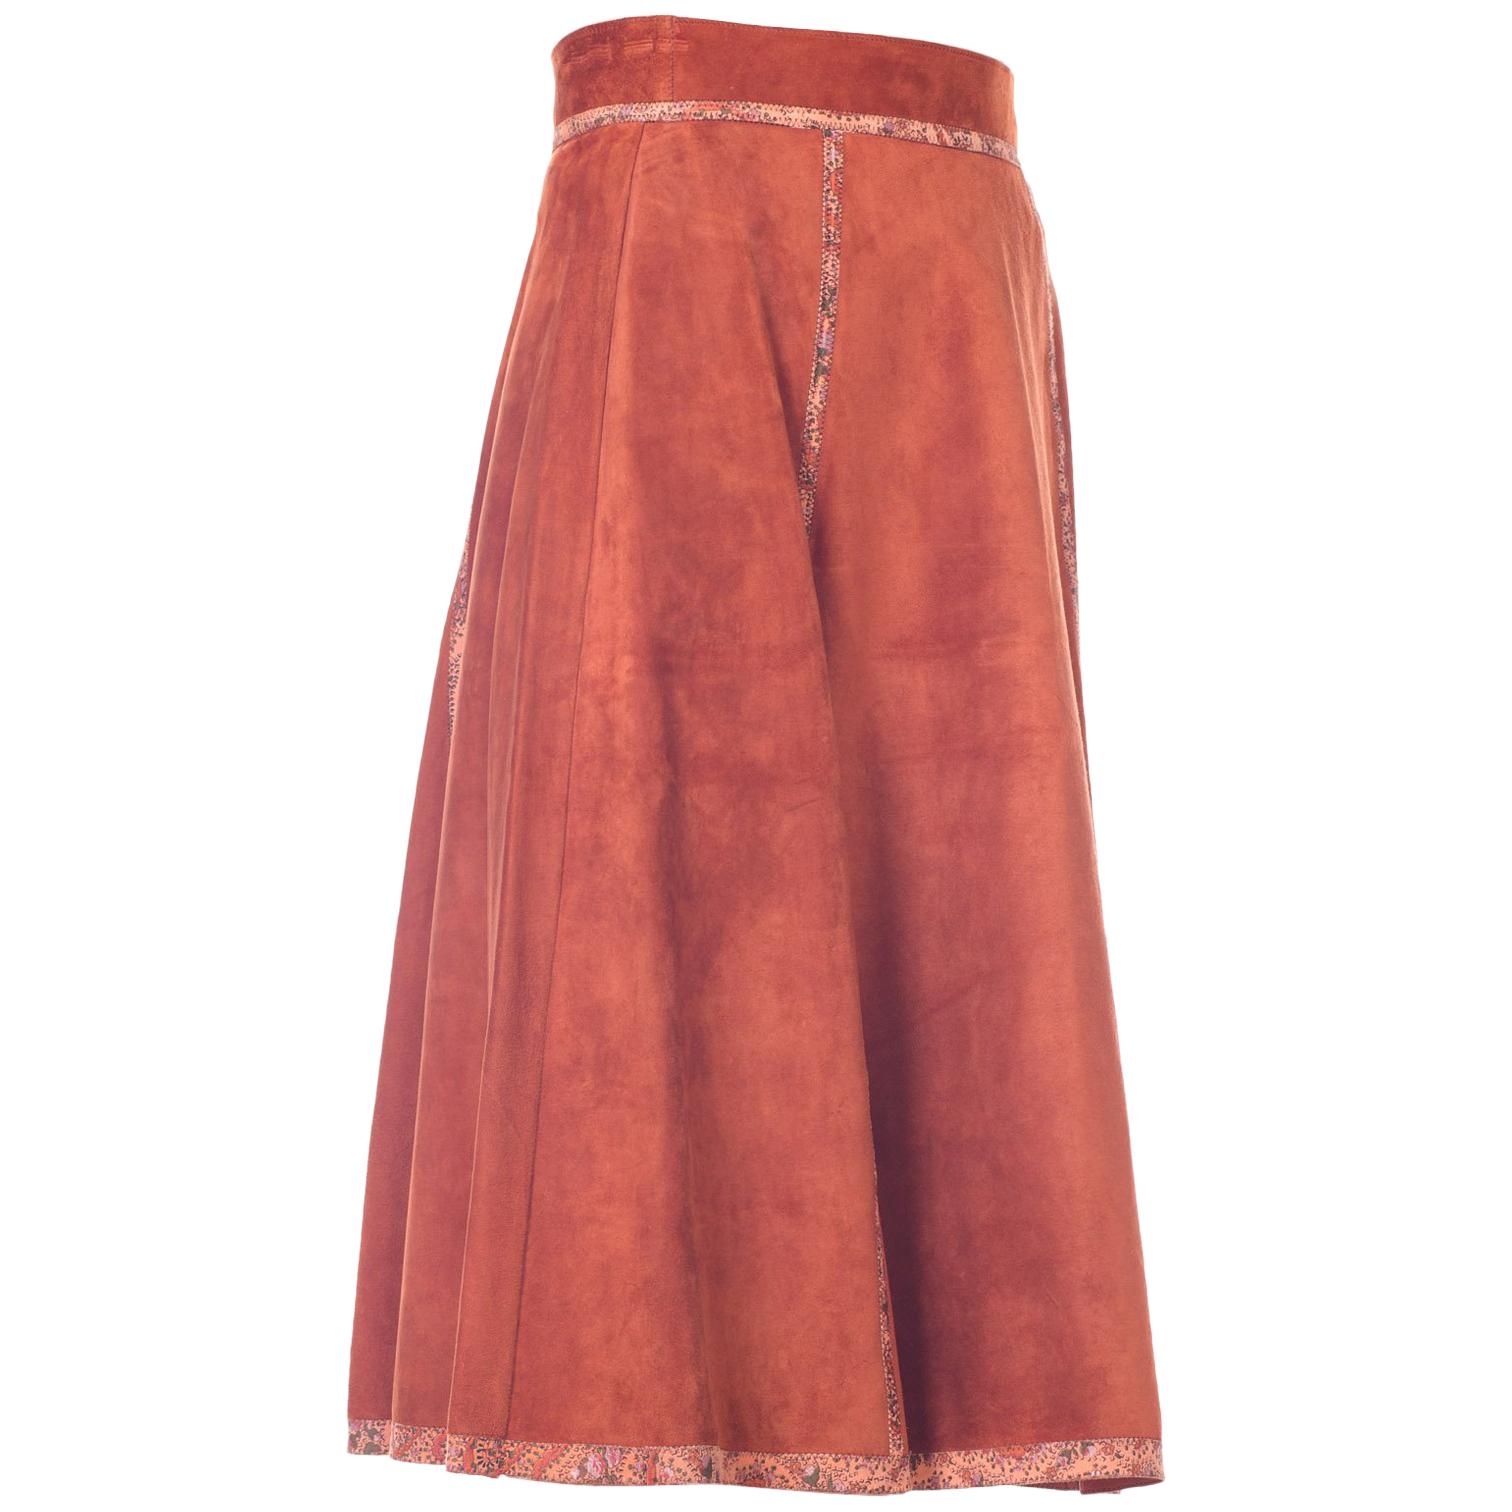 Roberto Cavalli Brown Suede Midi Skirt with Floral Leather Printed Trim 1970s